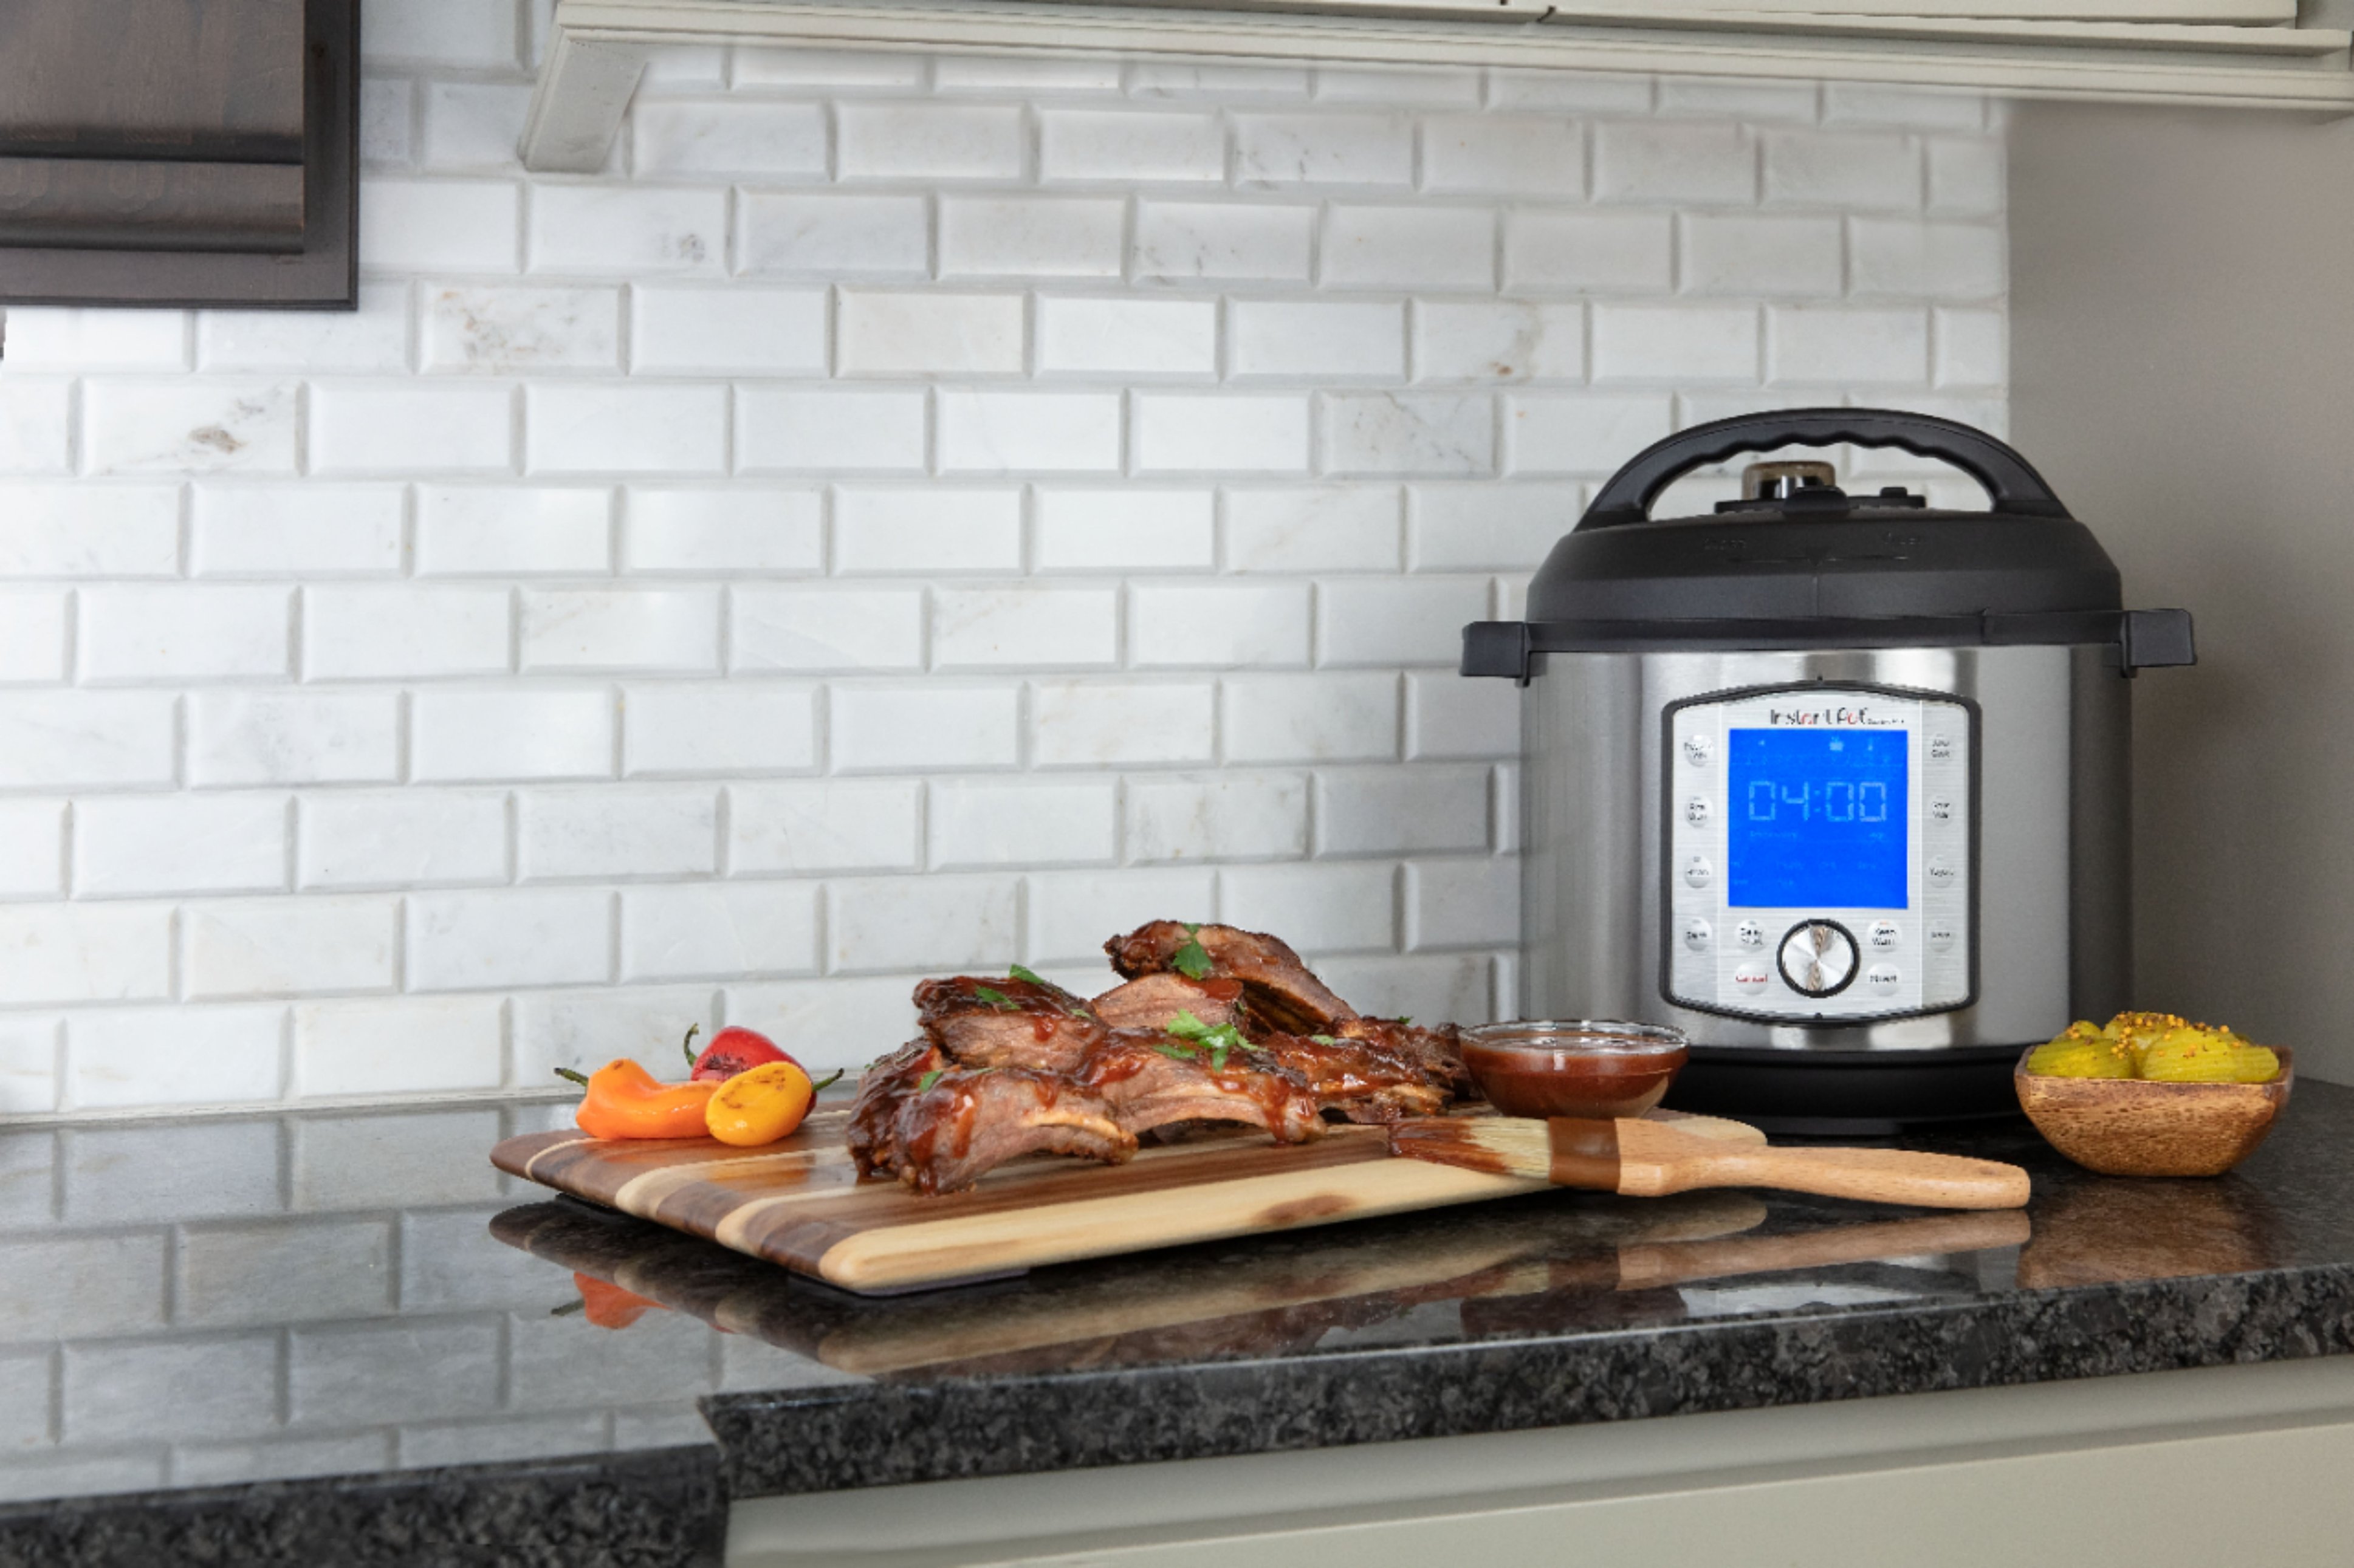 Instant Pot Duo Evo Plus Review - Pressure Cooking Today™